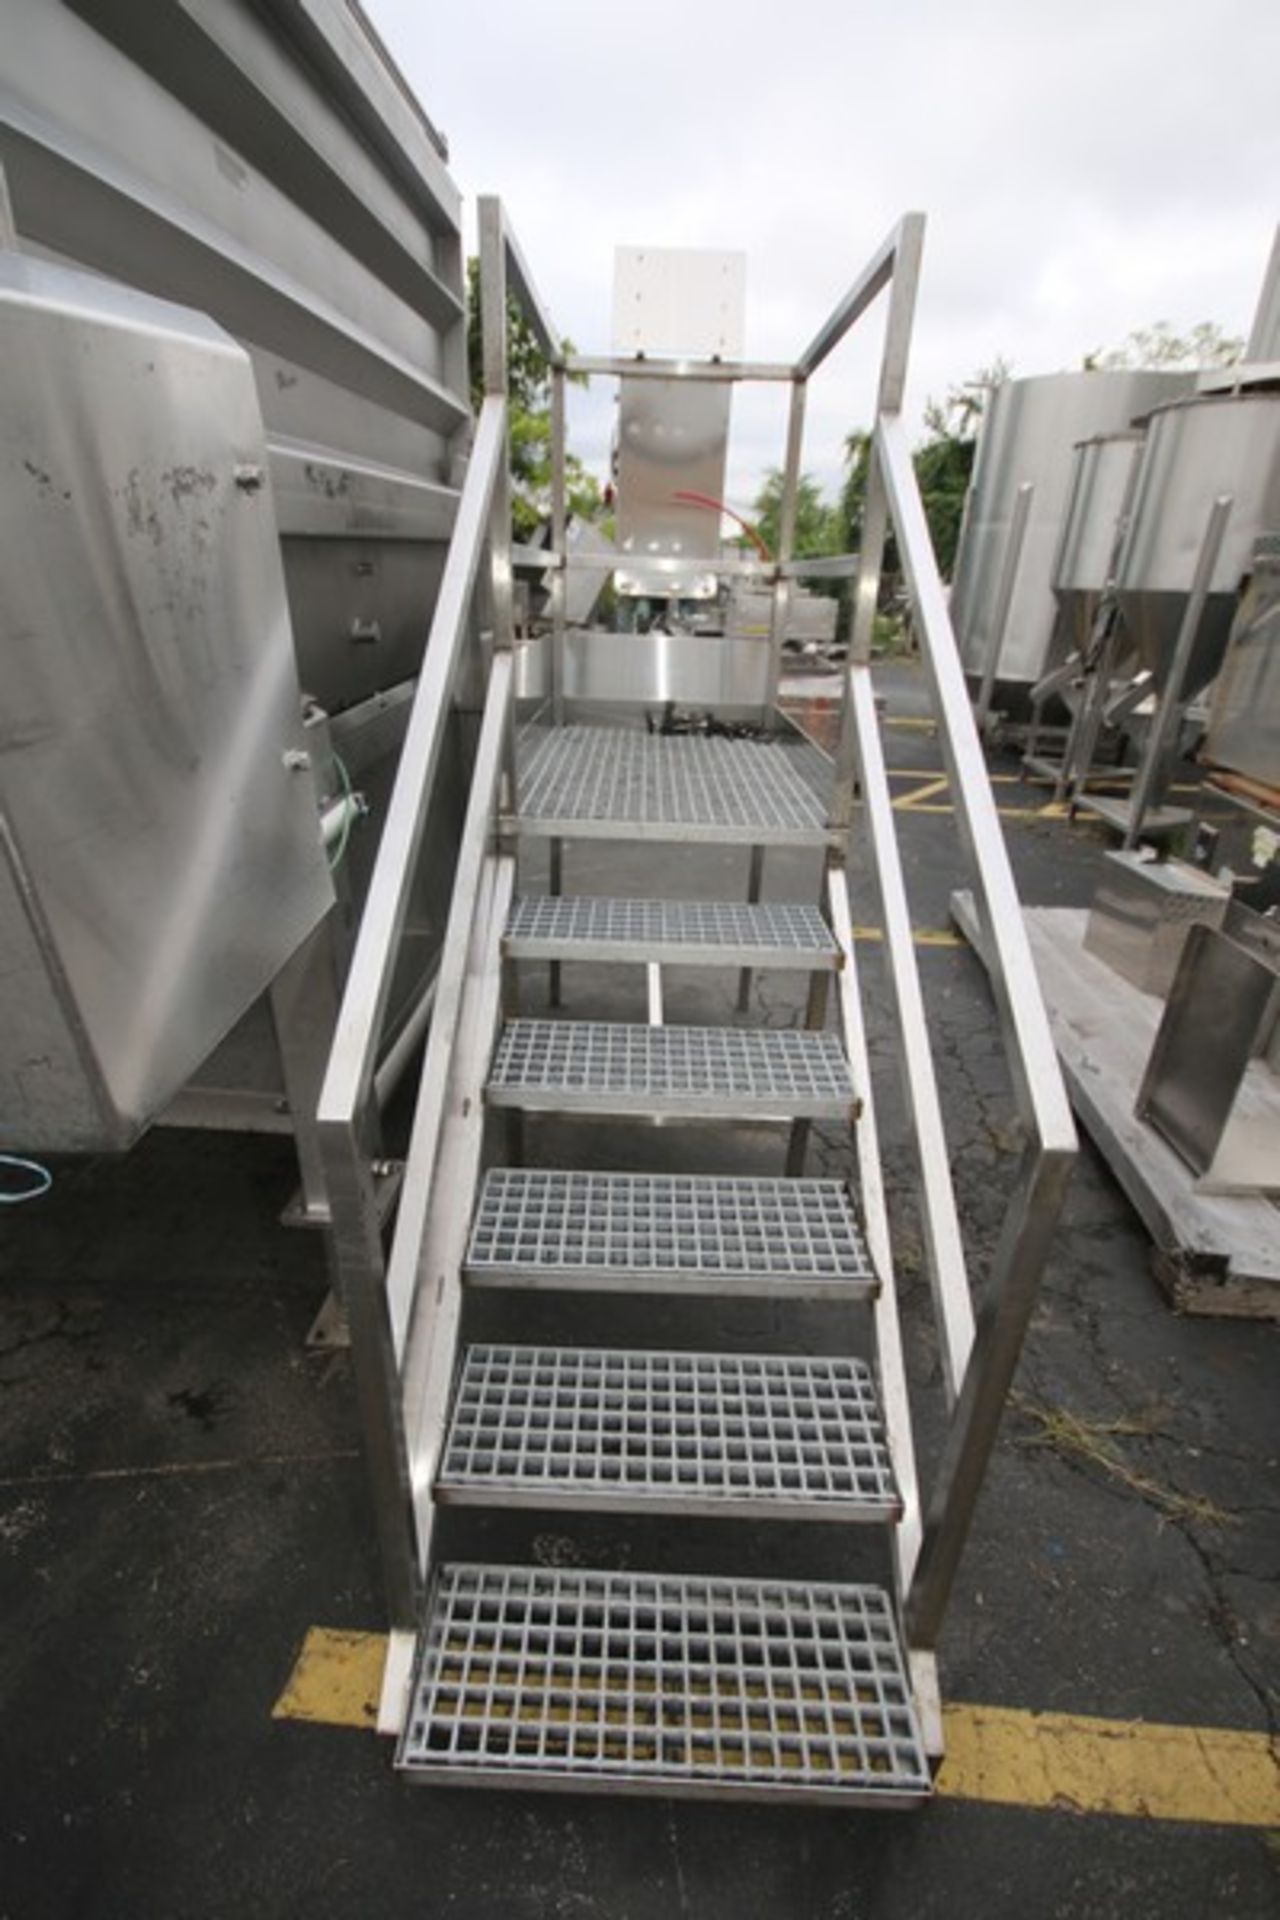 9' L x 30" W x 7' H, S/S Operator's Platform, with Plastic Grating, Handrail, with GE 100 amp Safety - Image 2 of 3